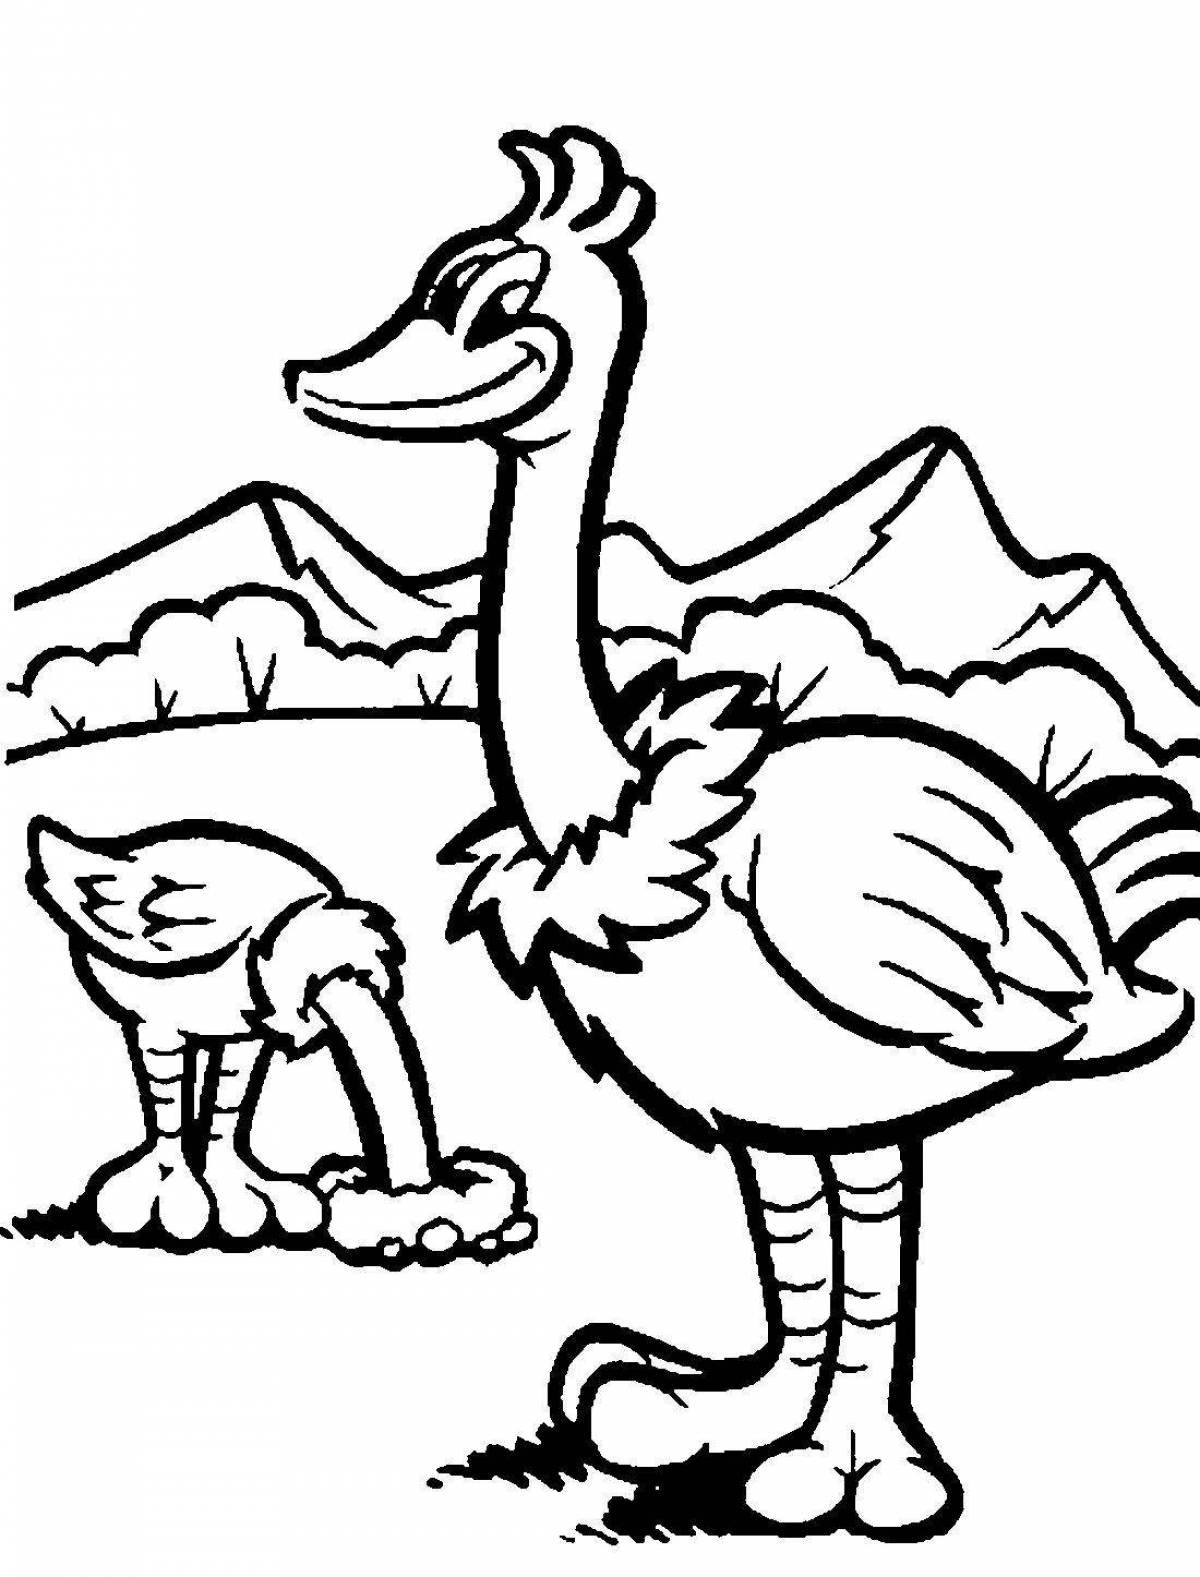 Amusing ostrich coloring book for kids